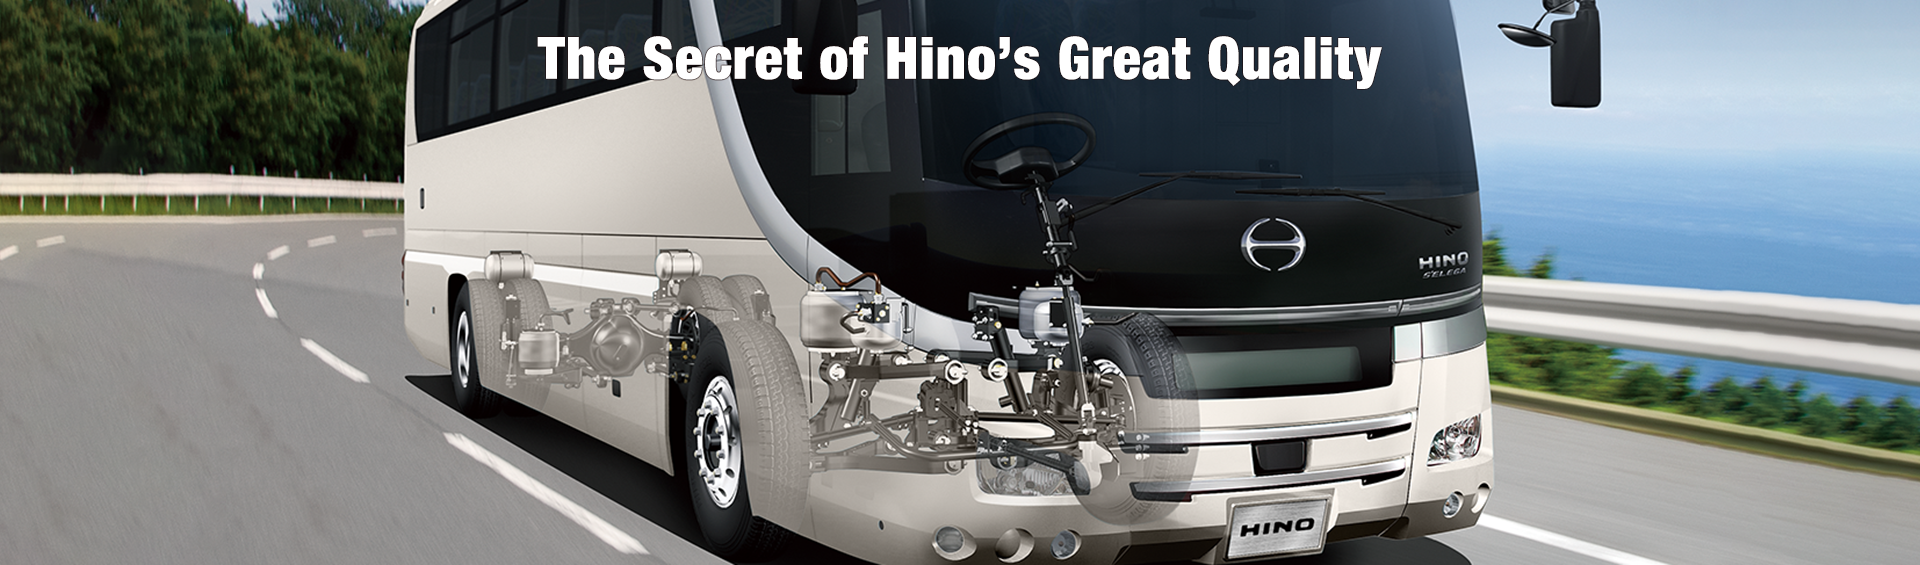 The secret of Hino great quality